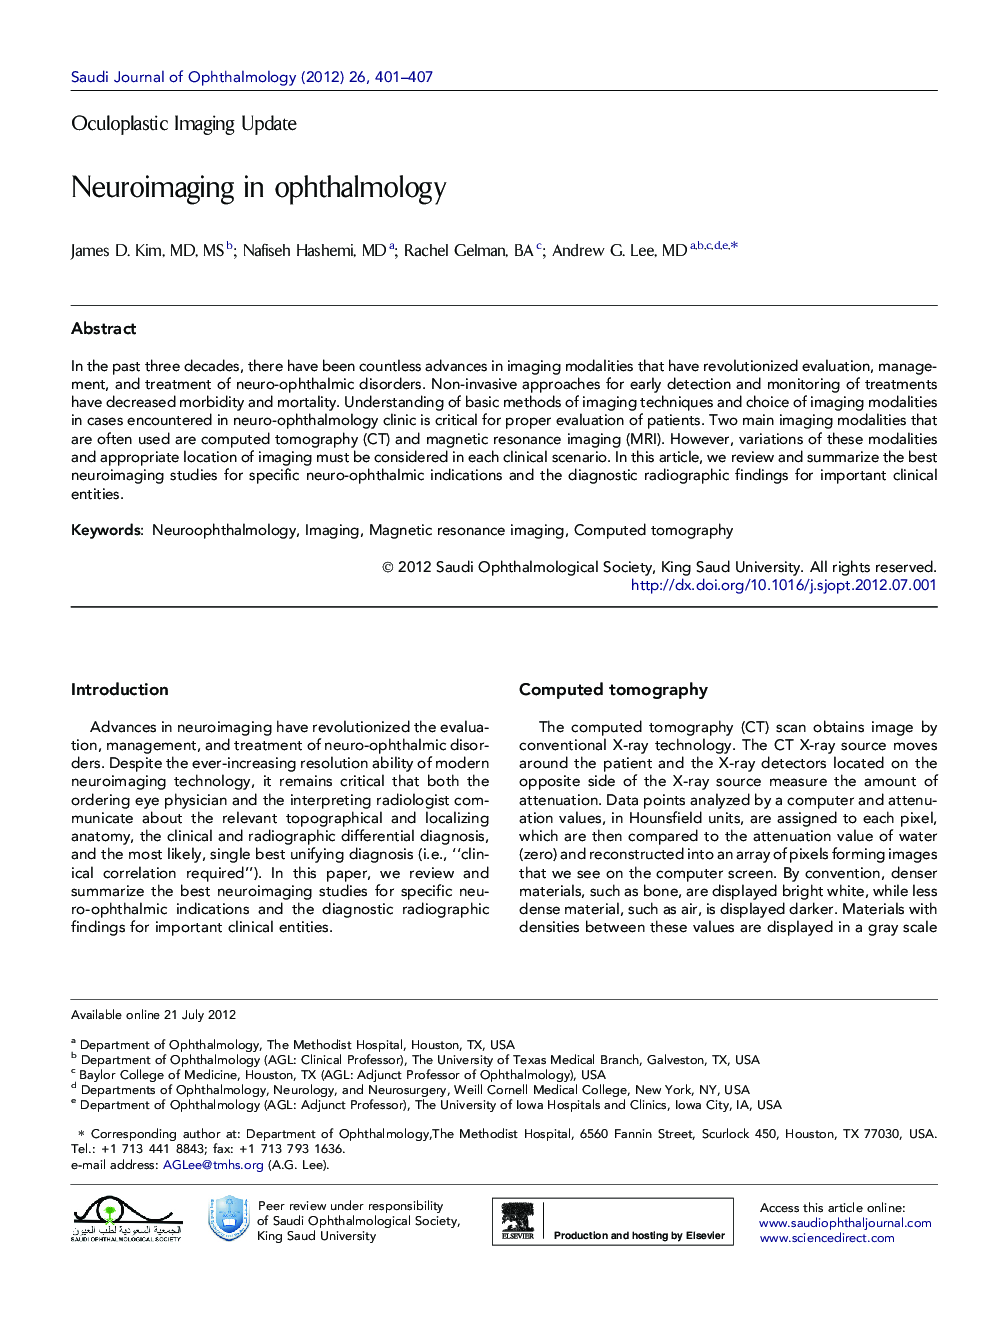 Neuroimaging in ophthalmology 